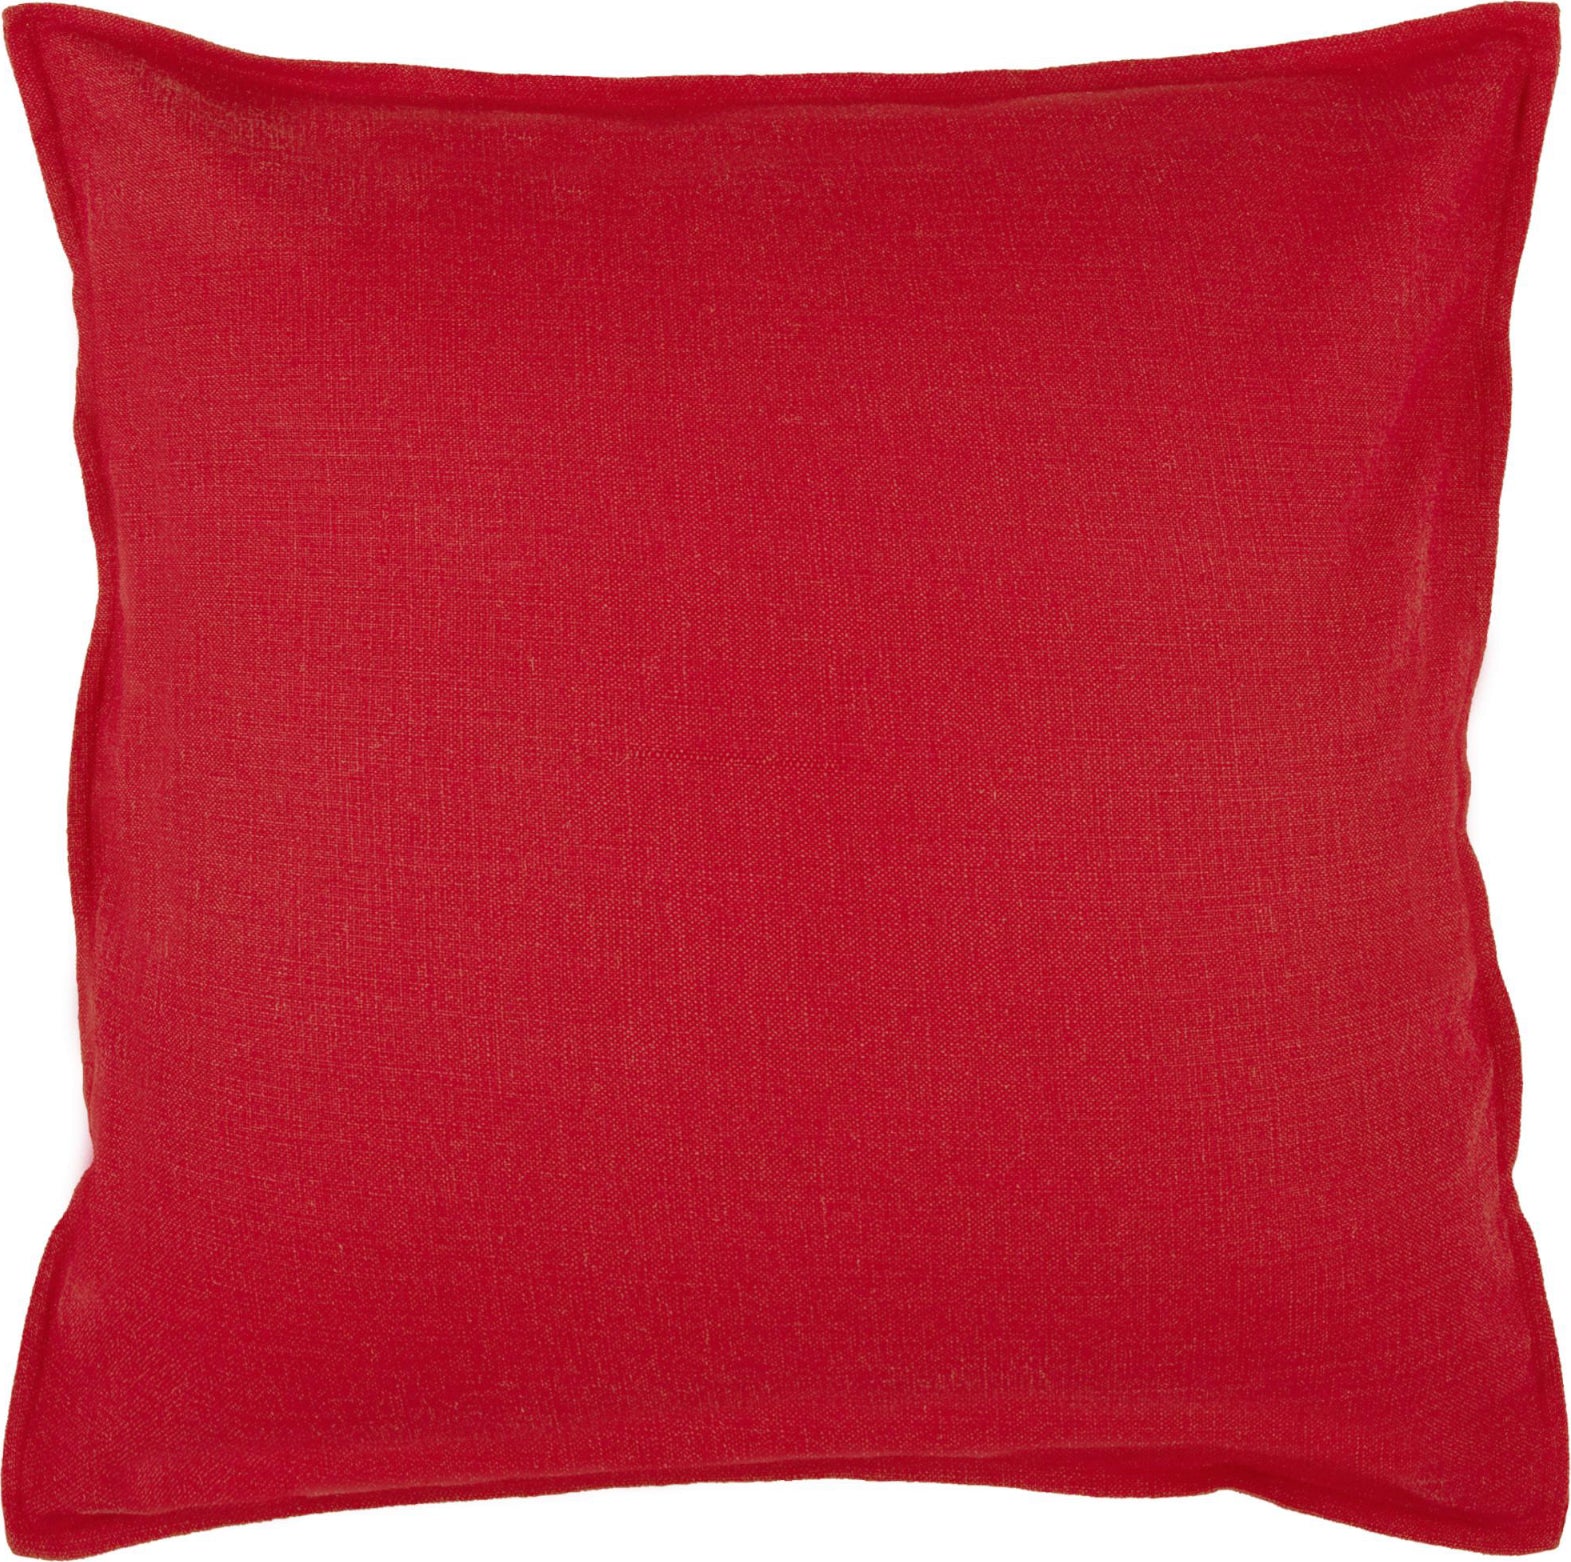 Rizzy Pillows T03713 Red